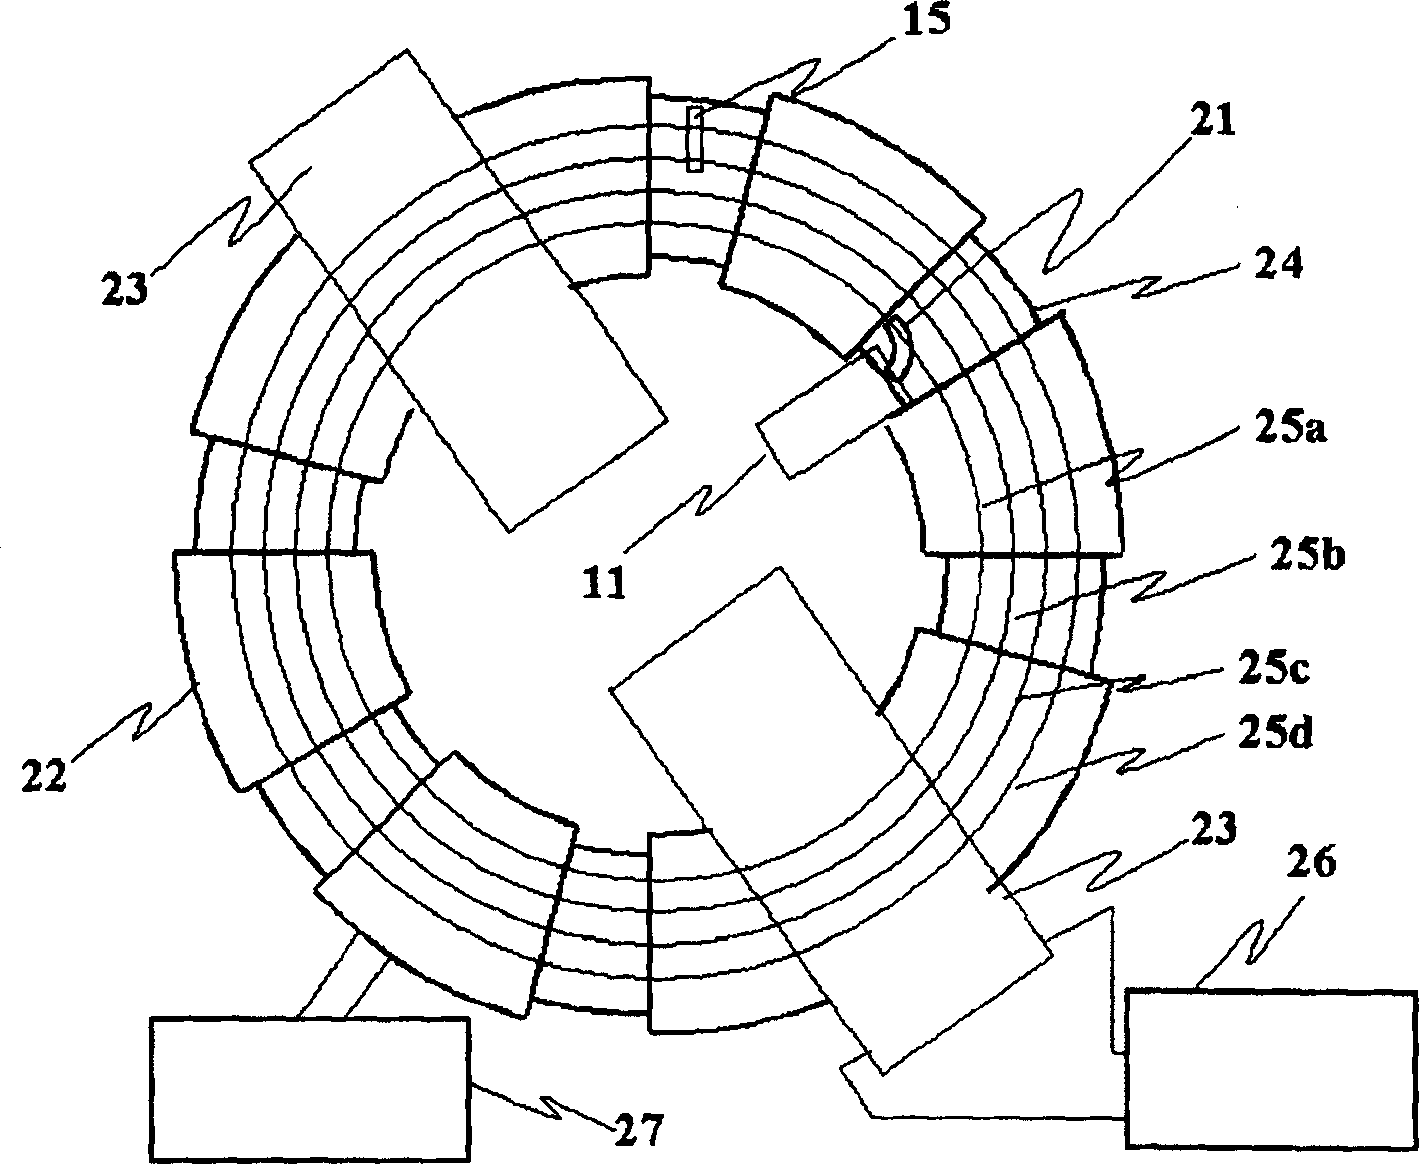 Electromagnetic wave generating device